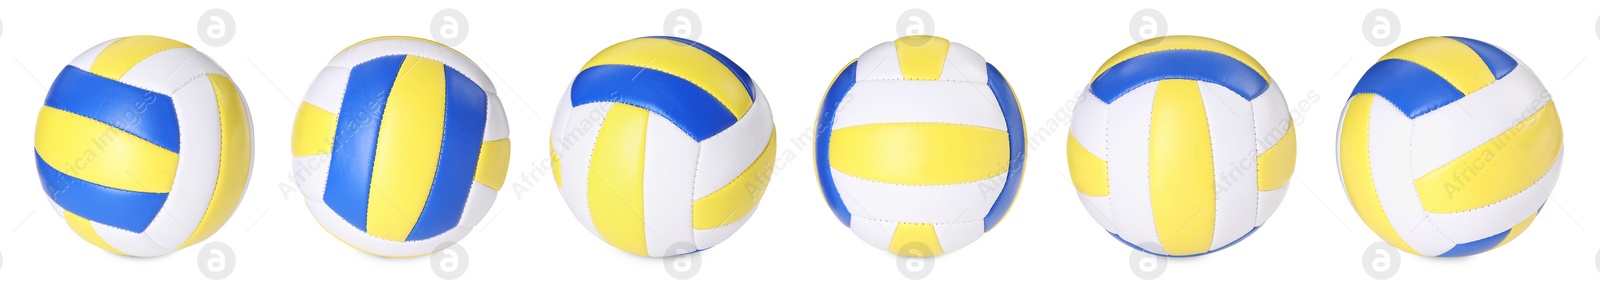 Image of Volleyball ball isolated on white, different sides